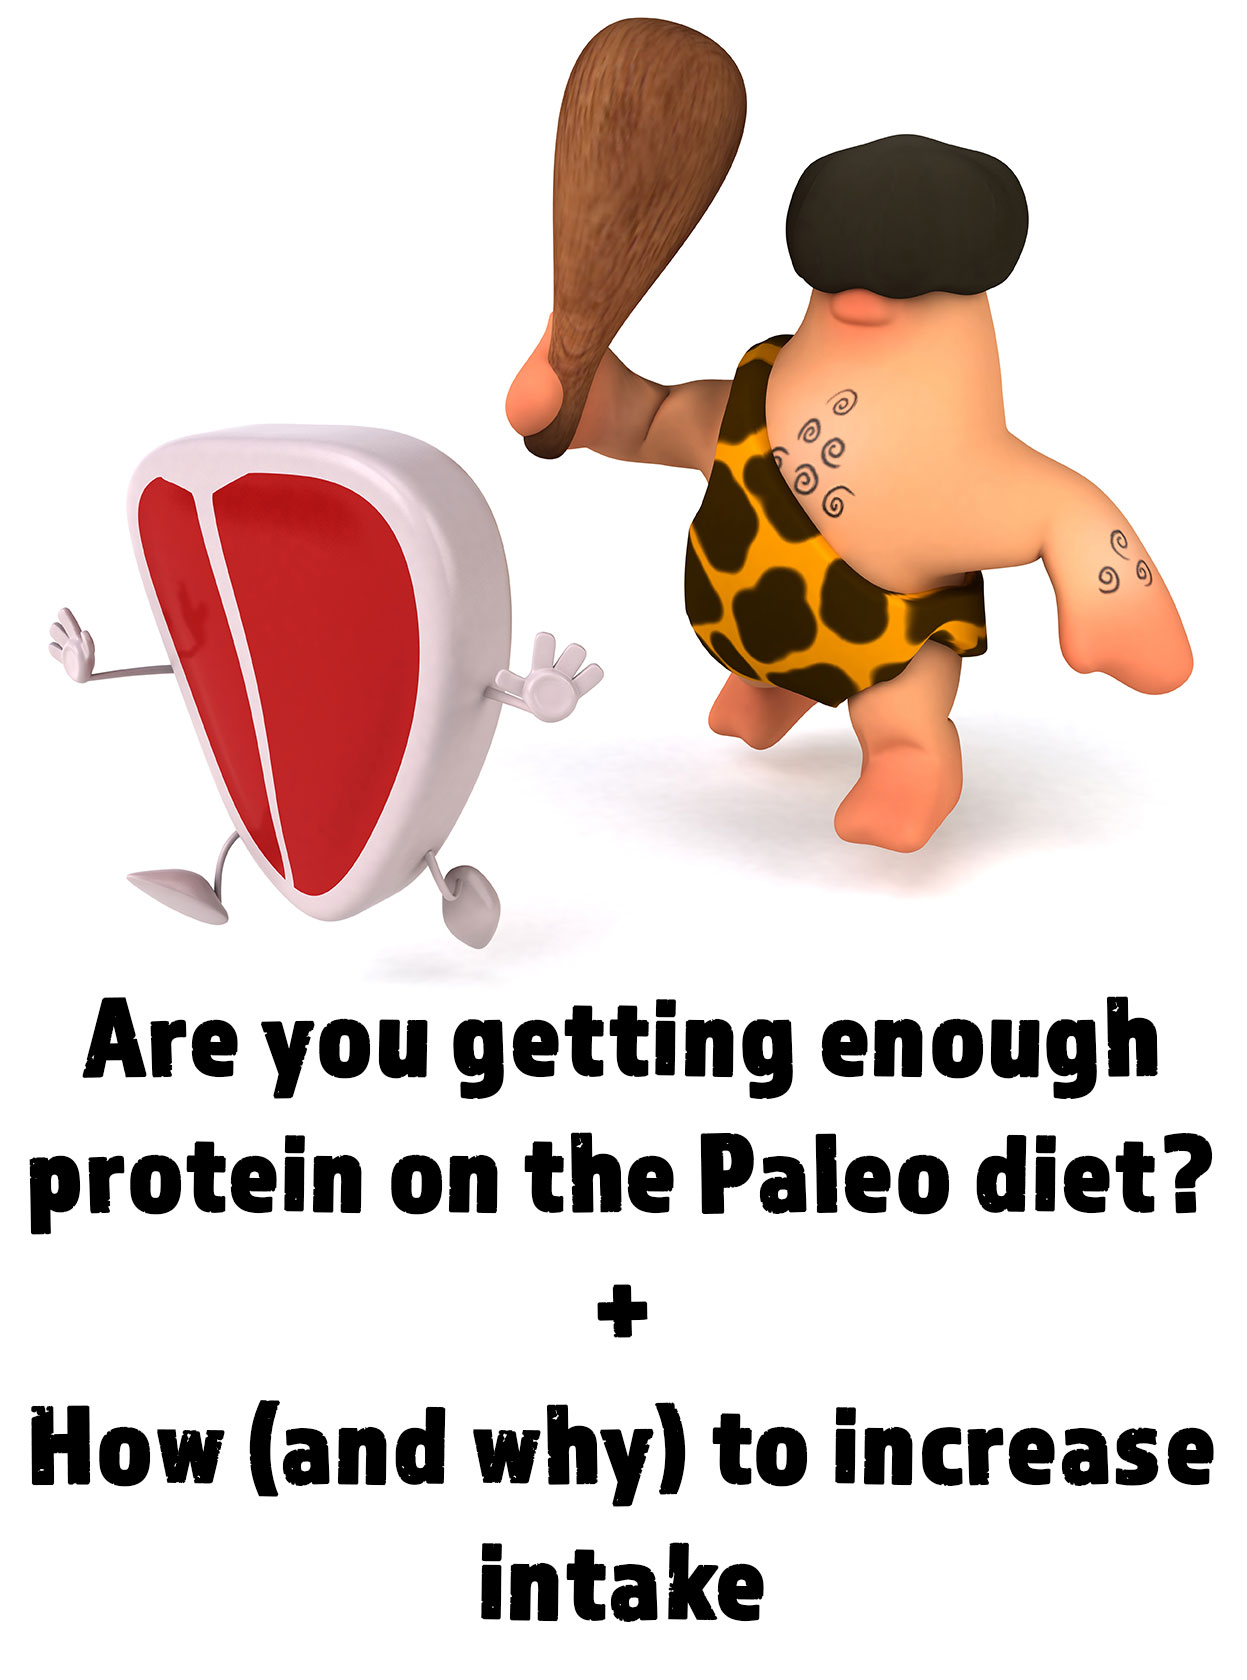 Are You Getting Enough Protein on Paleo? Plus How and Why To Increase Intake // TheCuriousCoconut.com